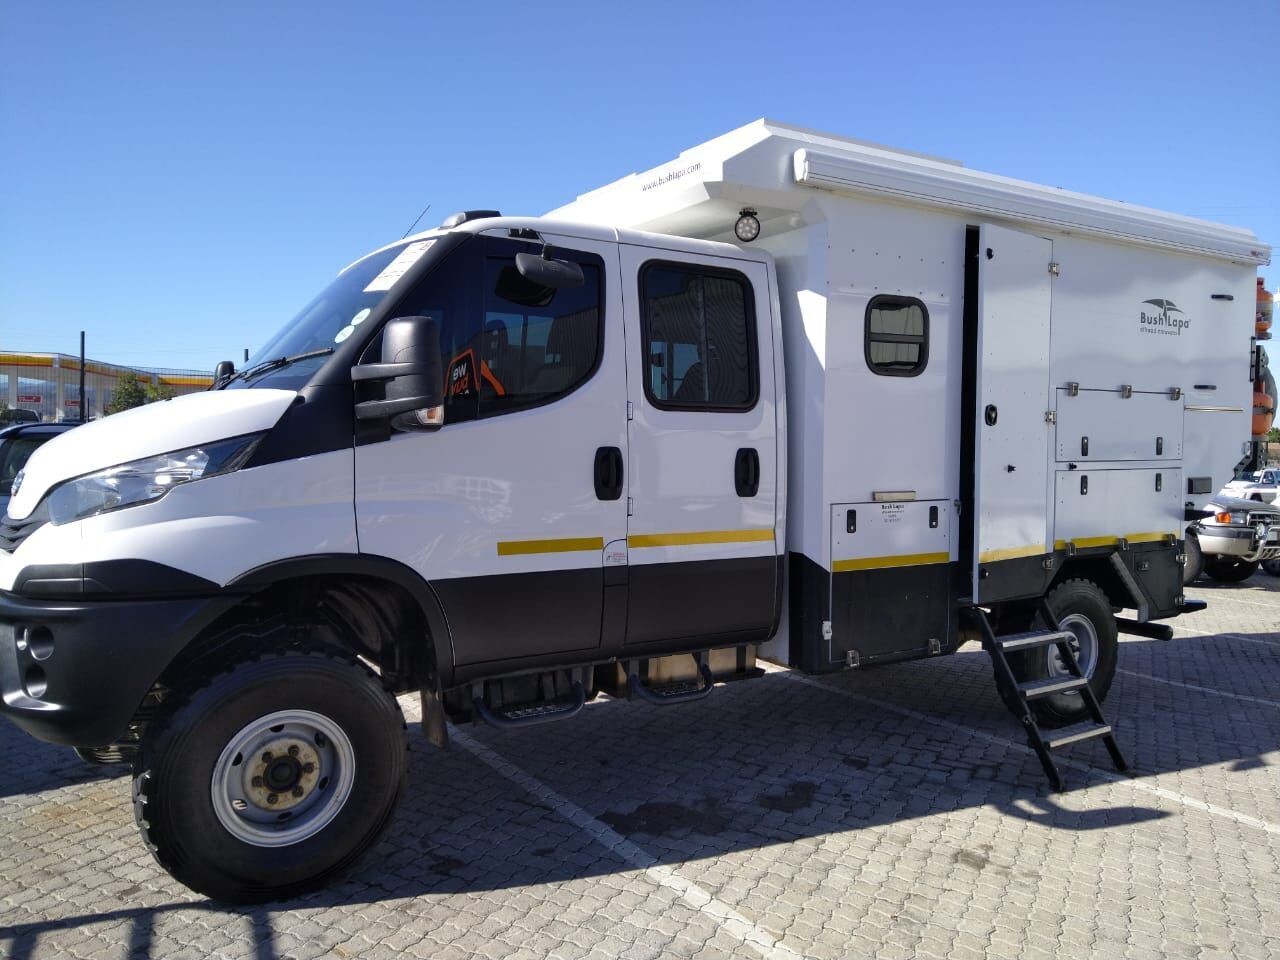 2019 Iveco Daily Double Cab 4x4 with Bushlapa Mammoth camper